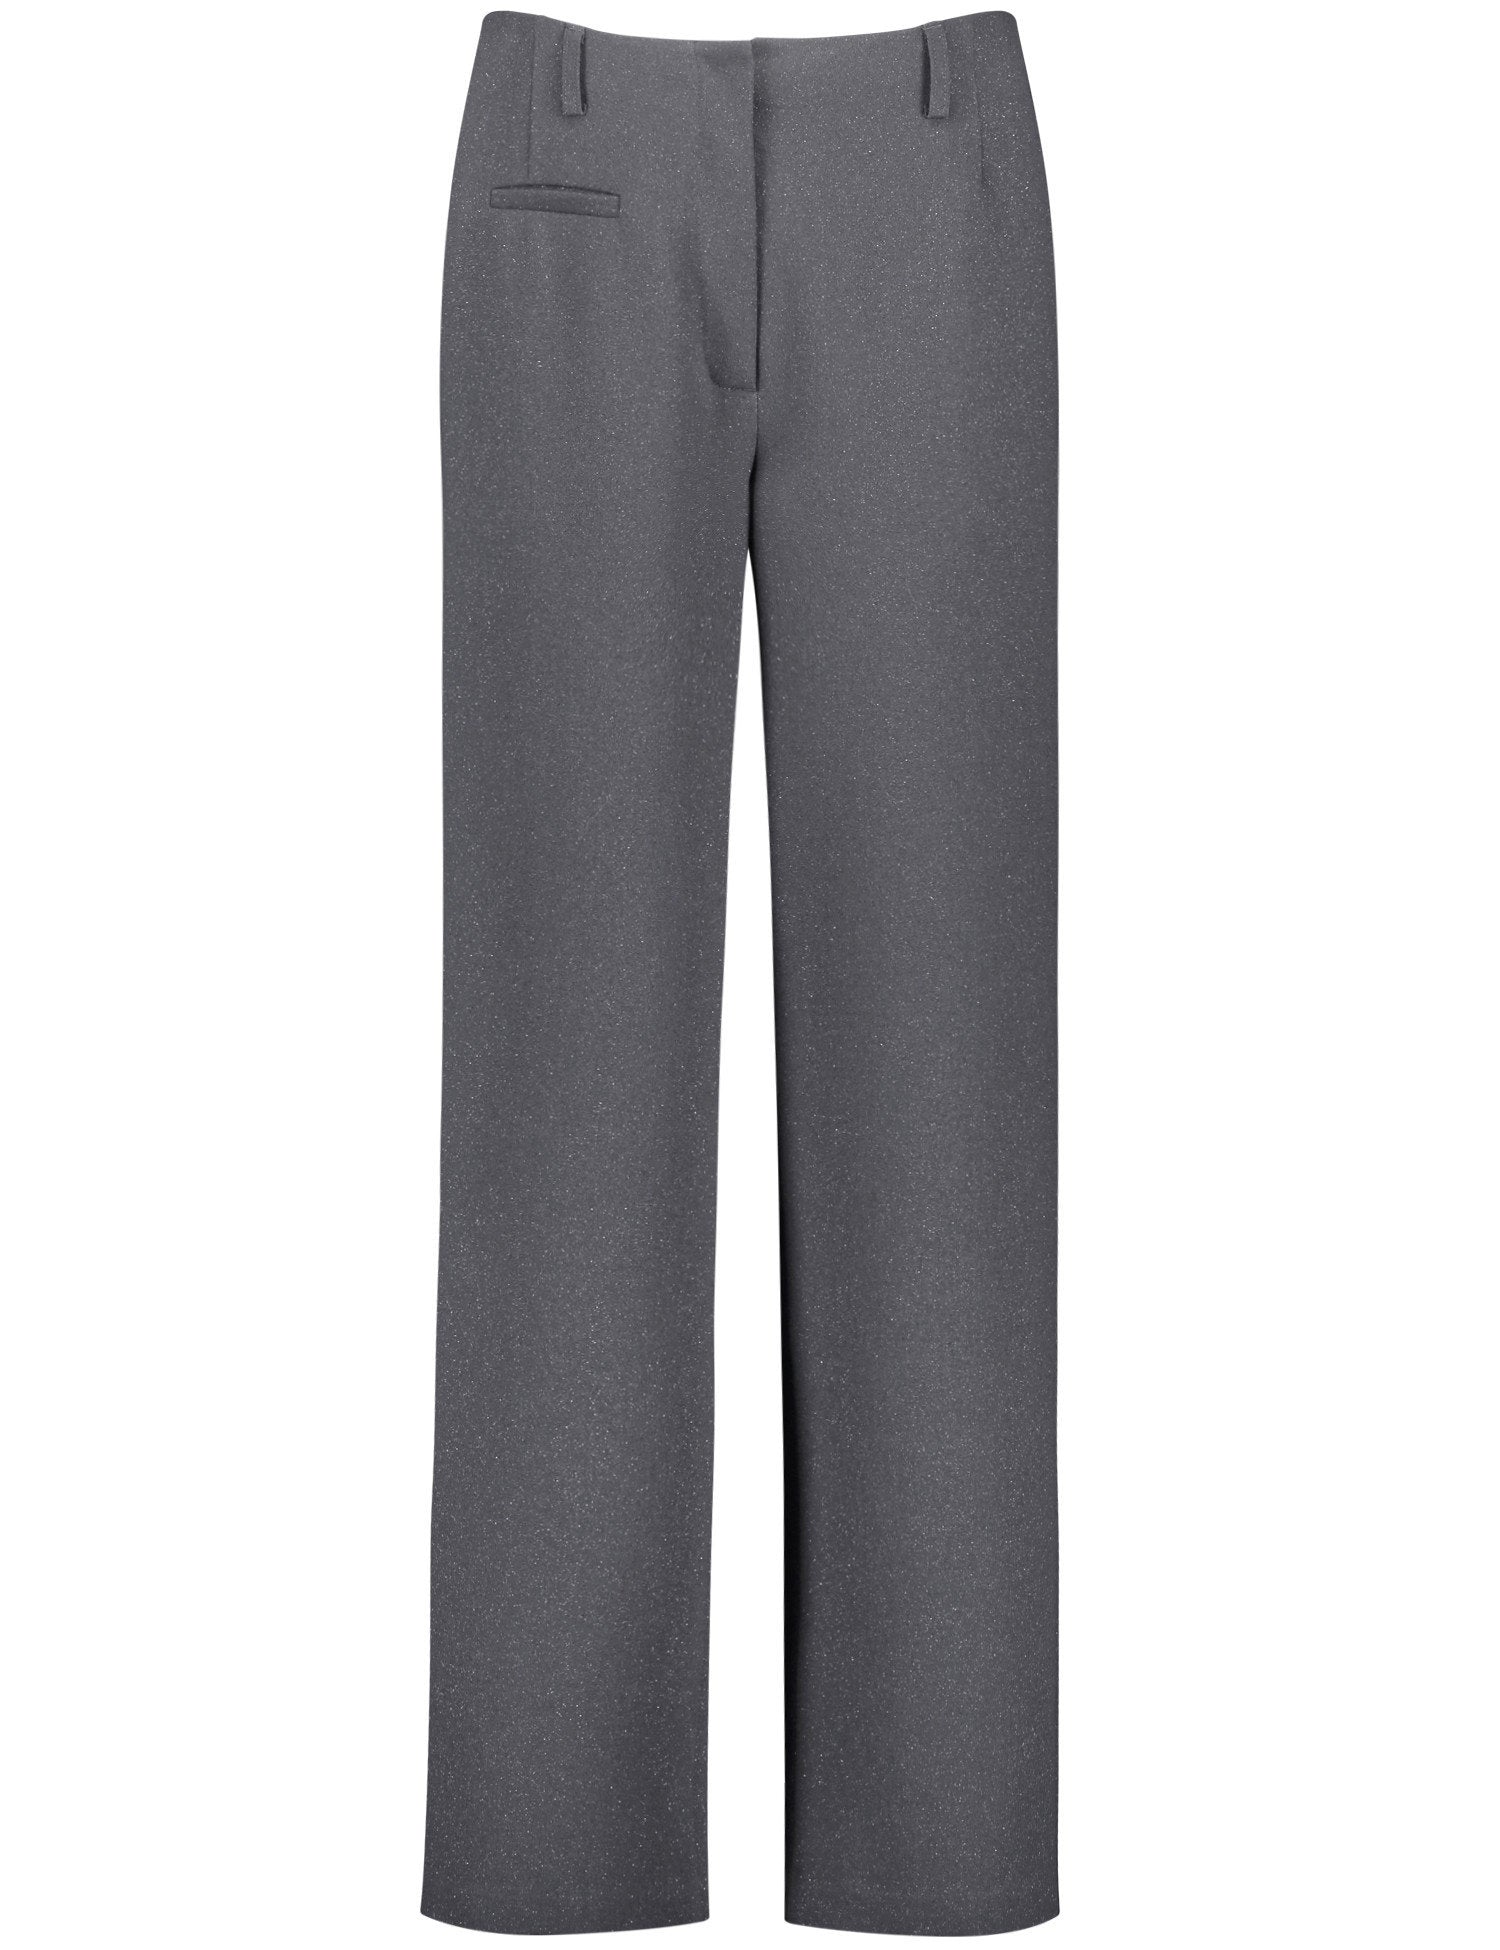 Wide-Leg Trousers With Added Stretch For Comfort_420432-11351_2210_02